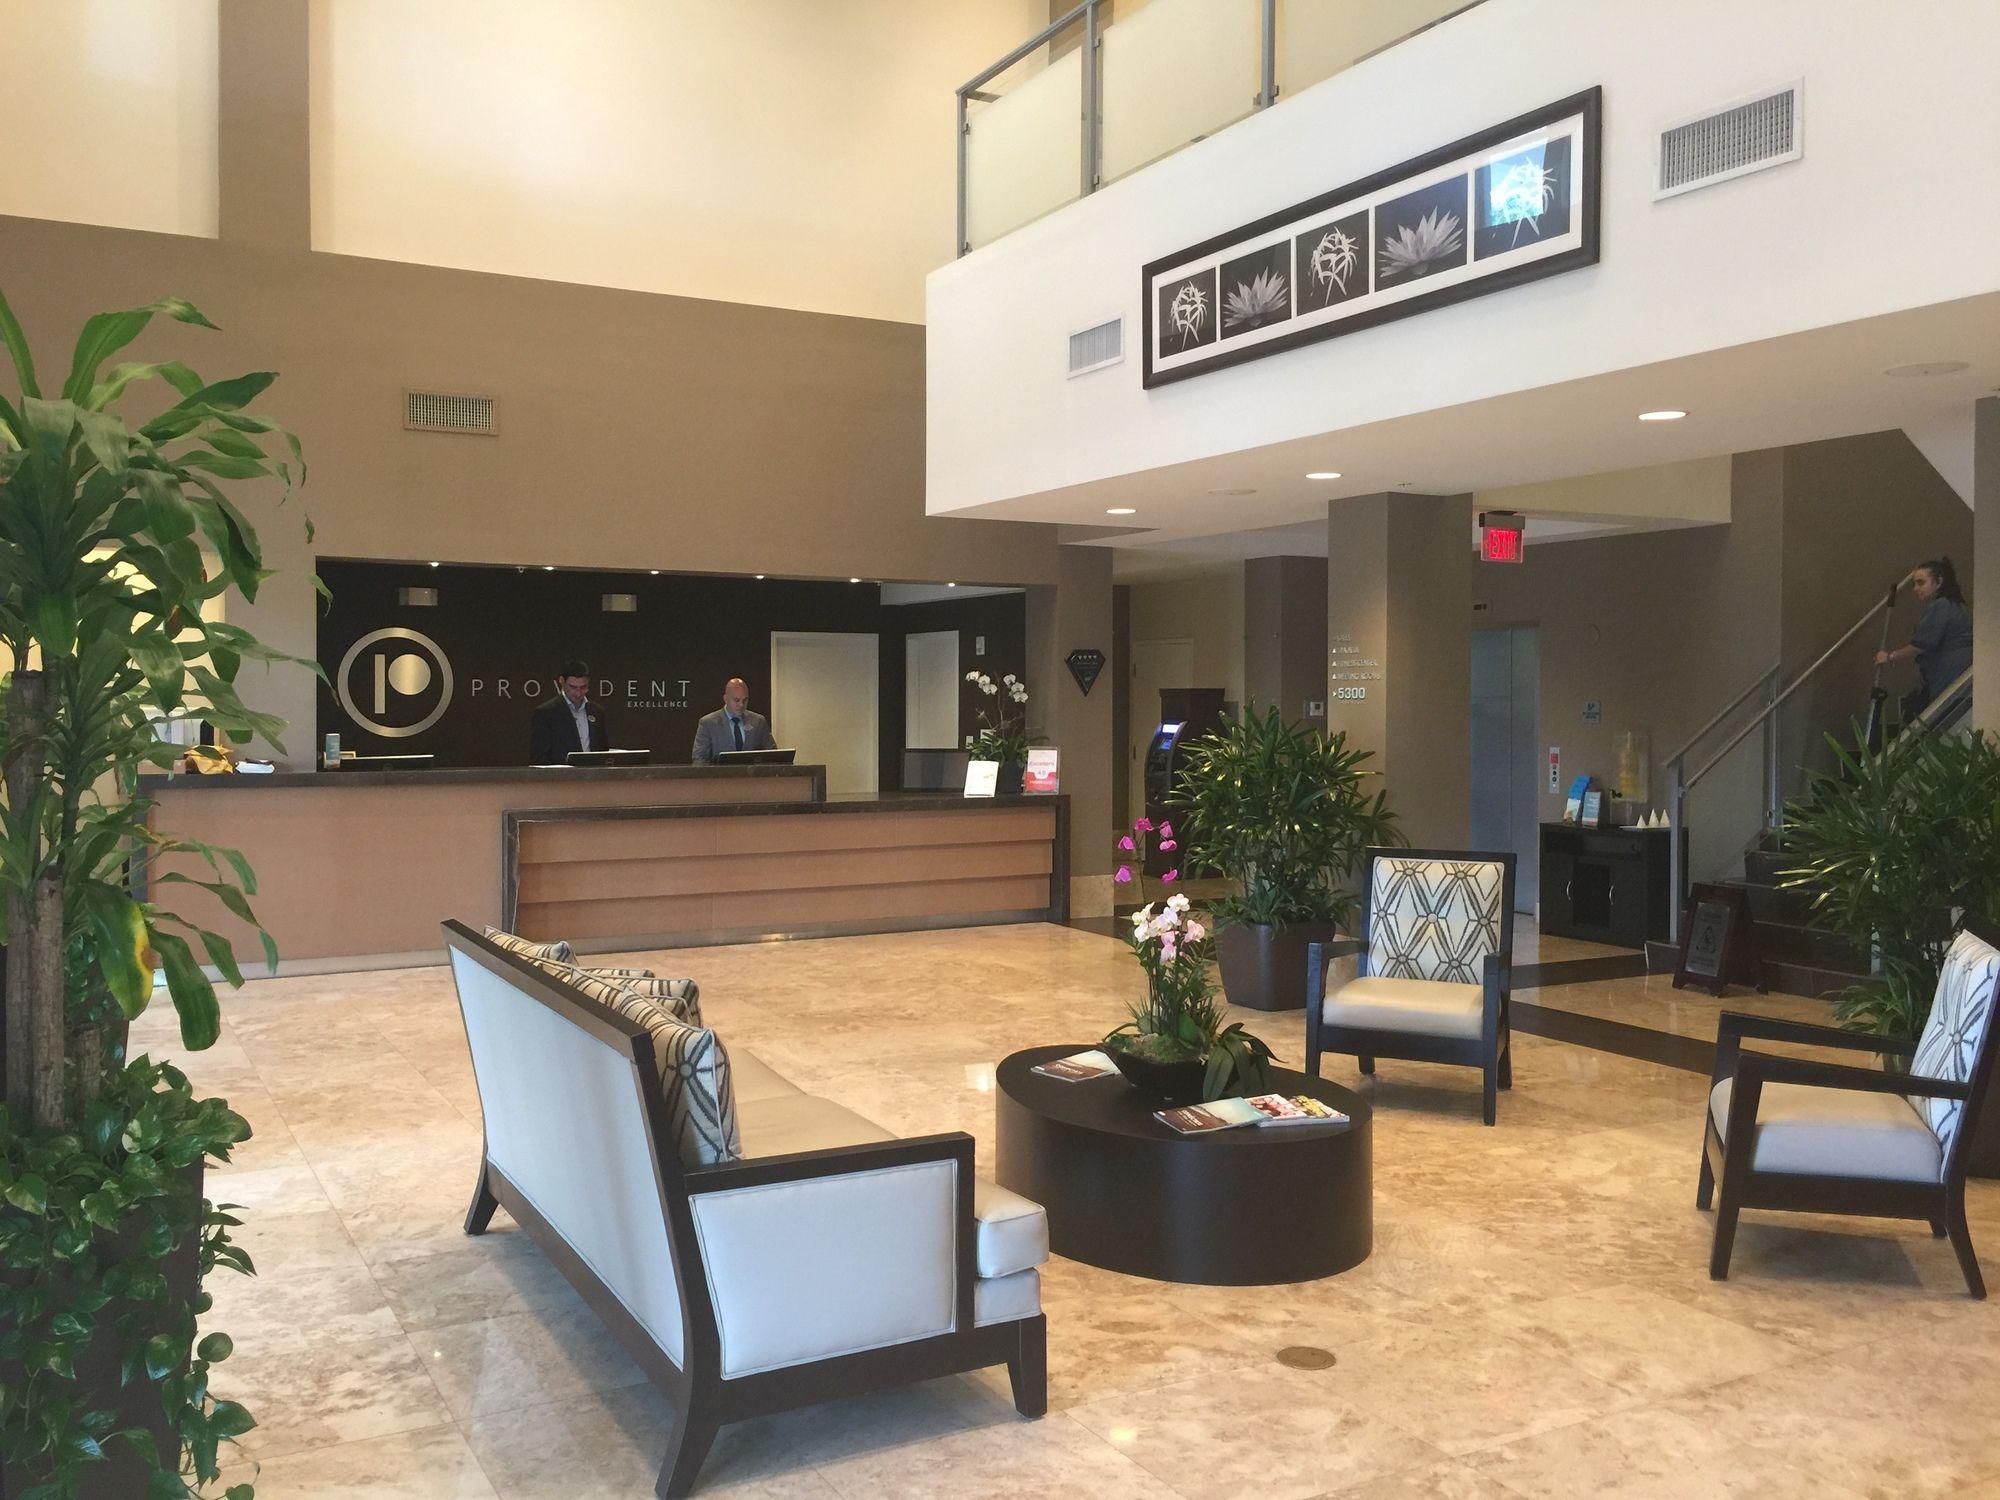 Lobby view Provident Doral at the Blue Mia